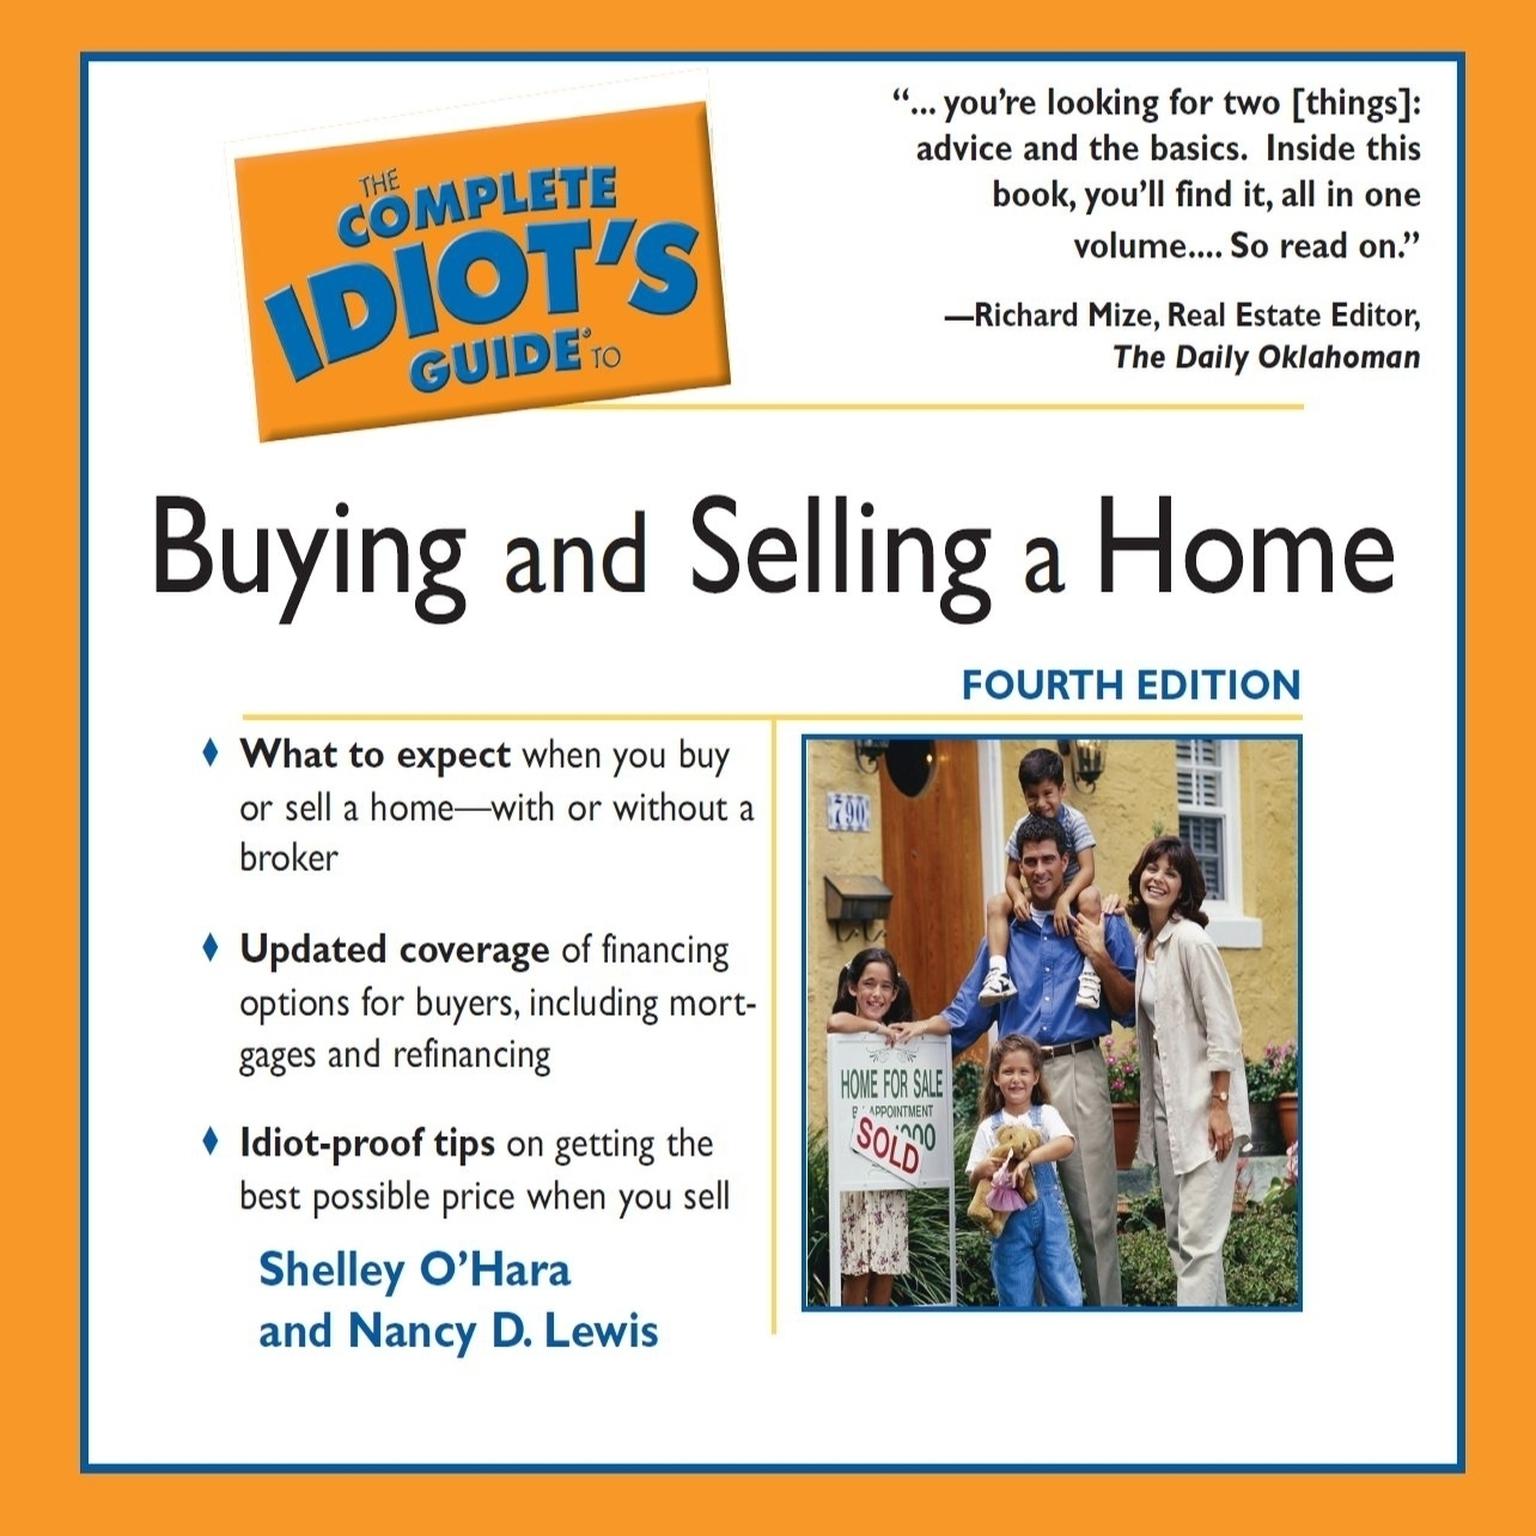 The Complete Idiots Guide To Buying and Selling a Home (Abridged) Audiobook, by Shelley O'Hara